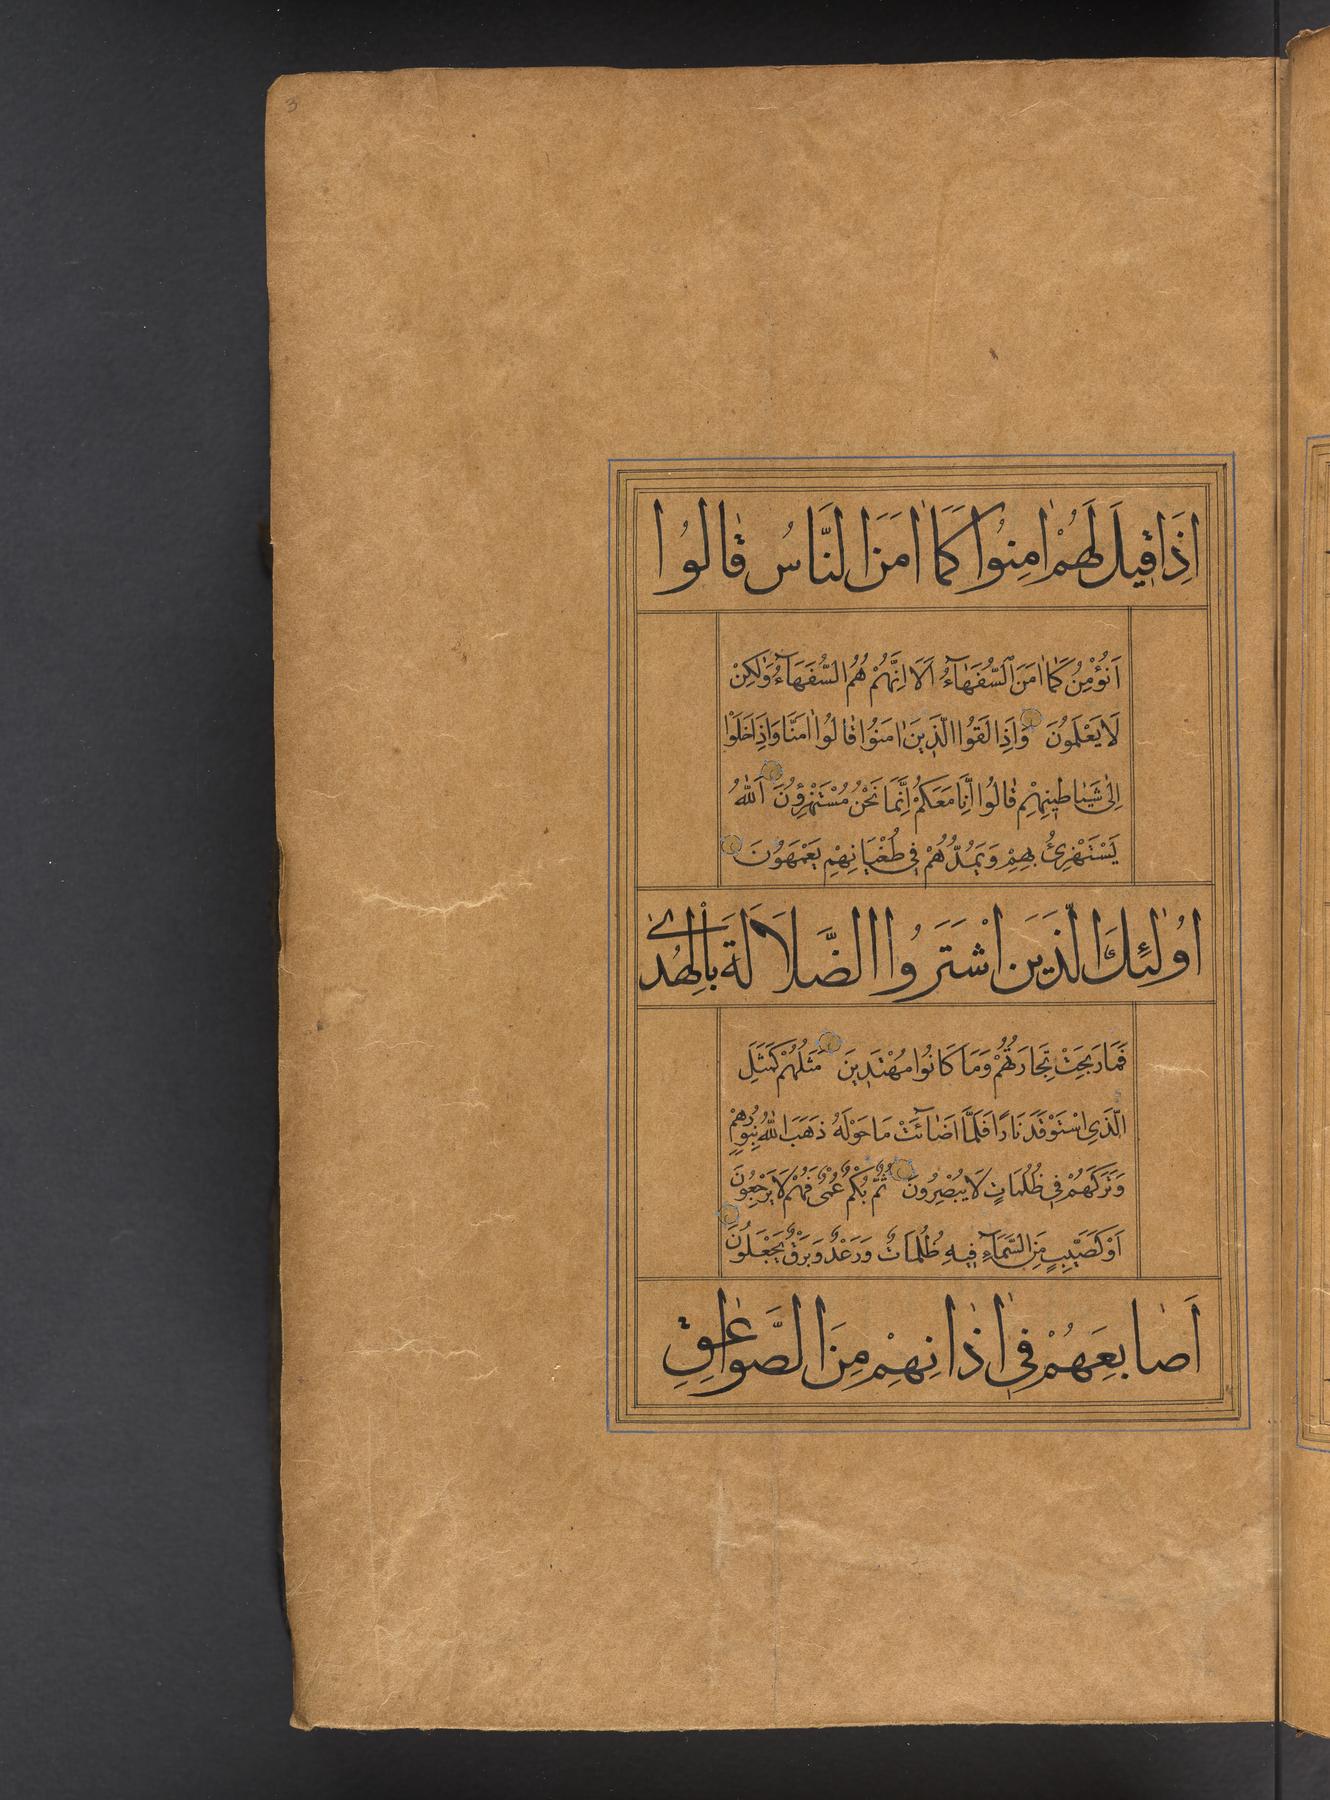 page from the Qur'an with all vocalizataions